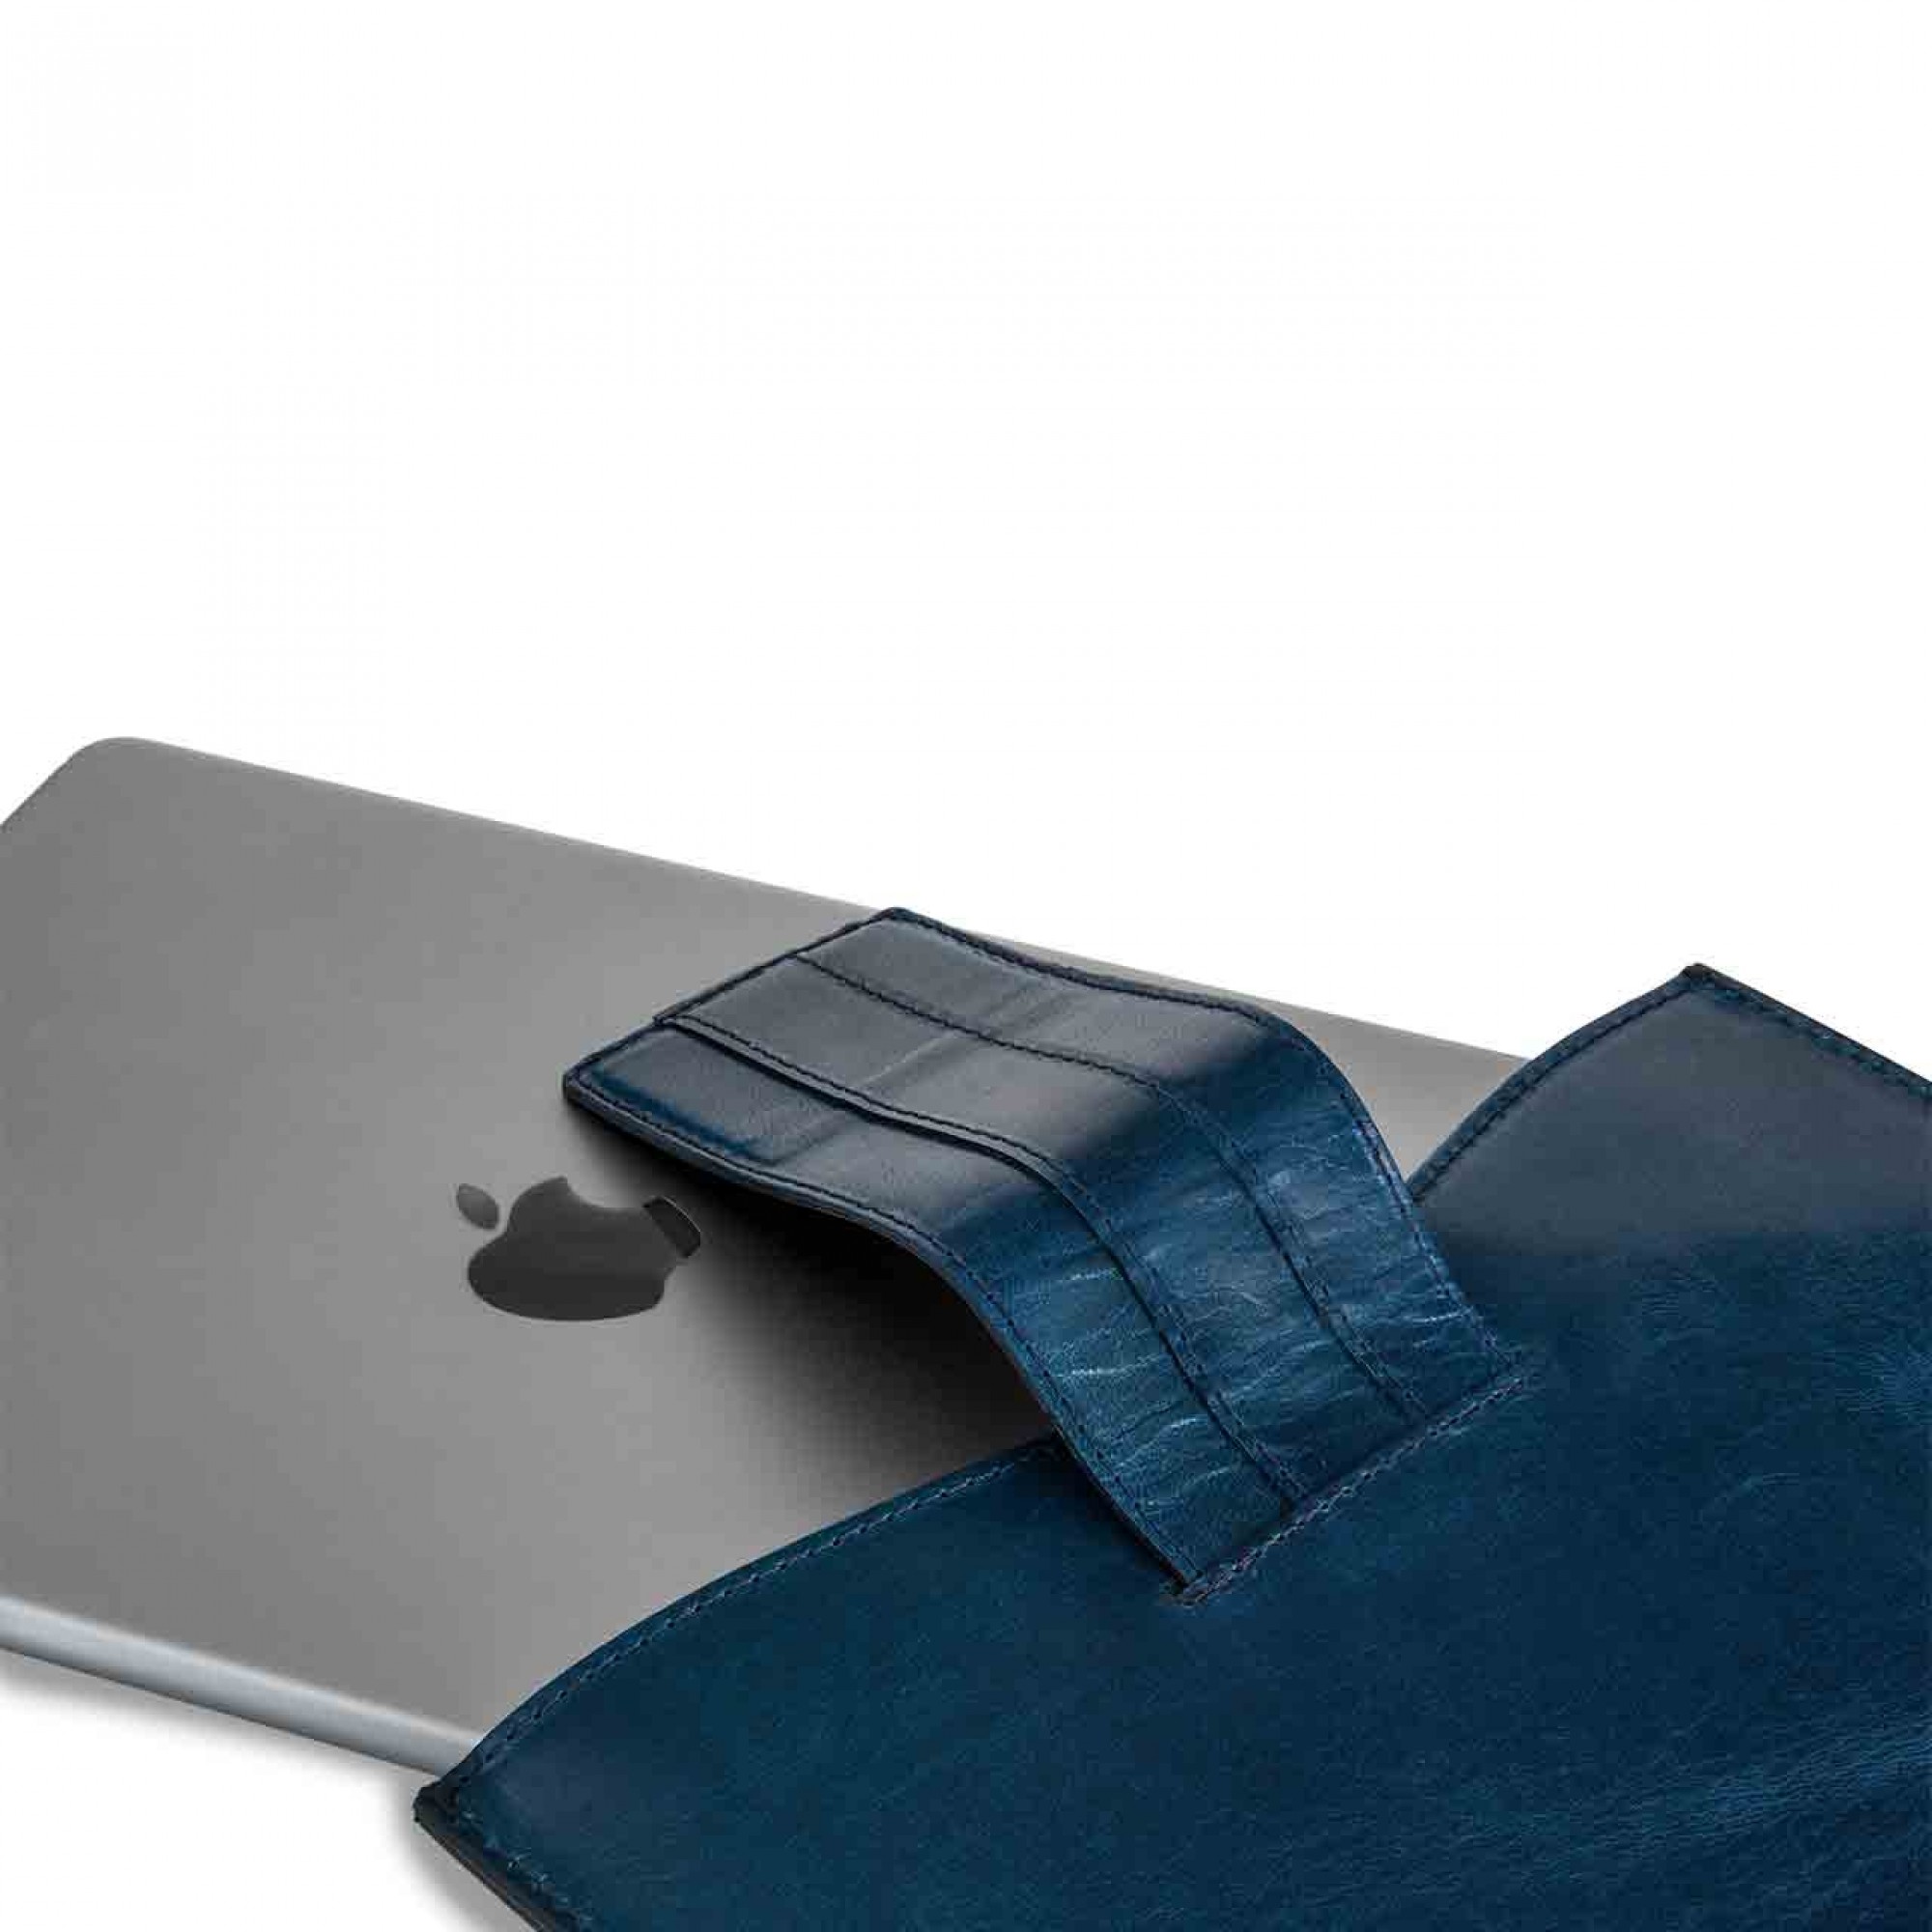 Ipad and tablet case cover